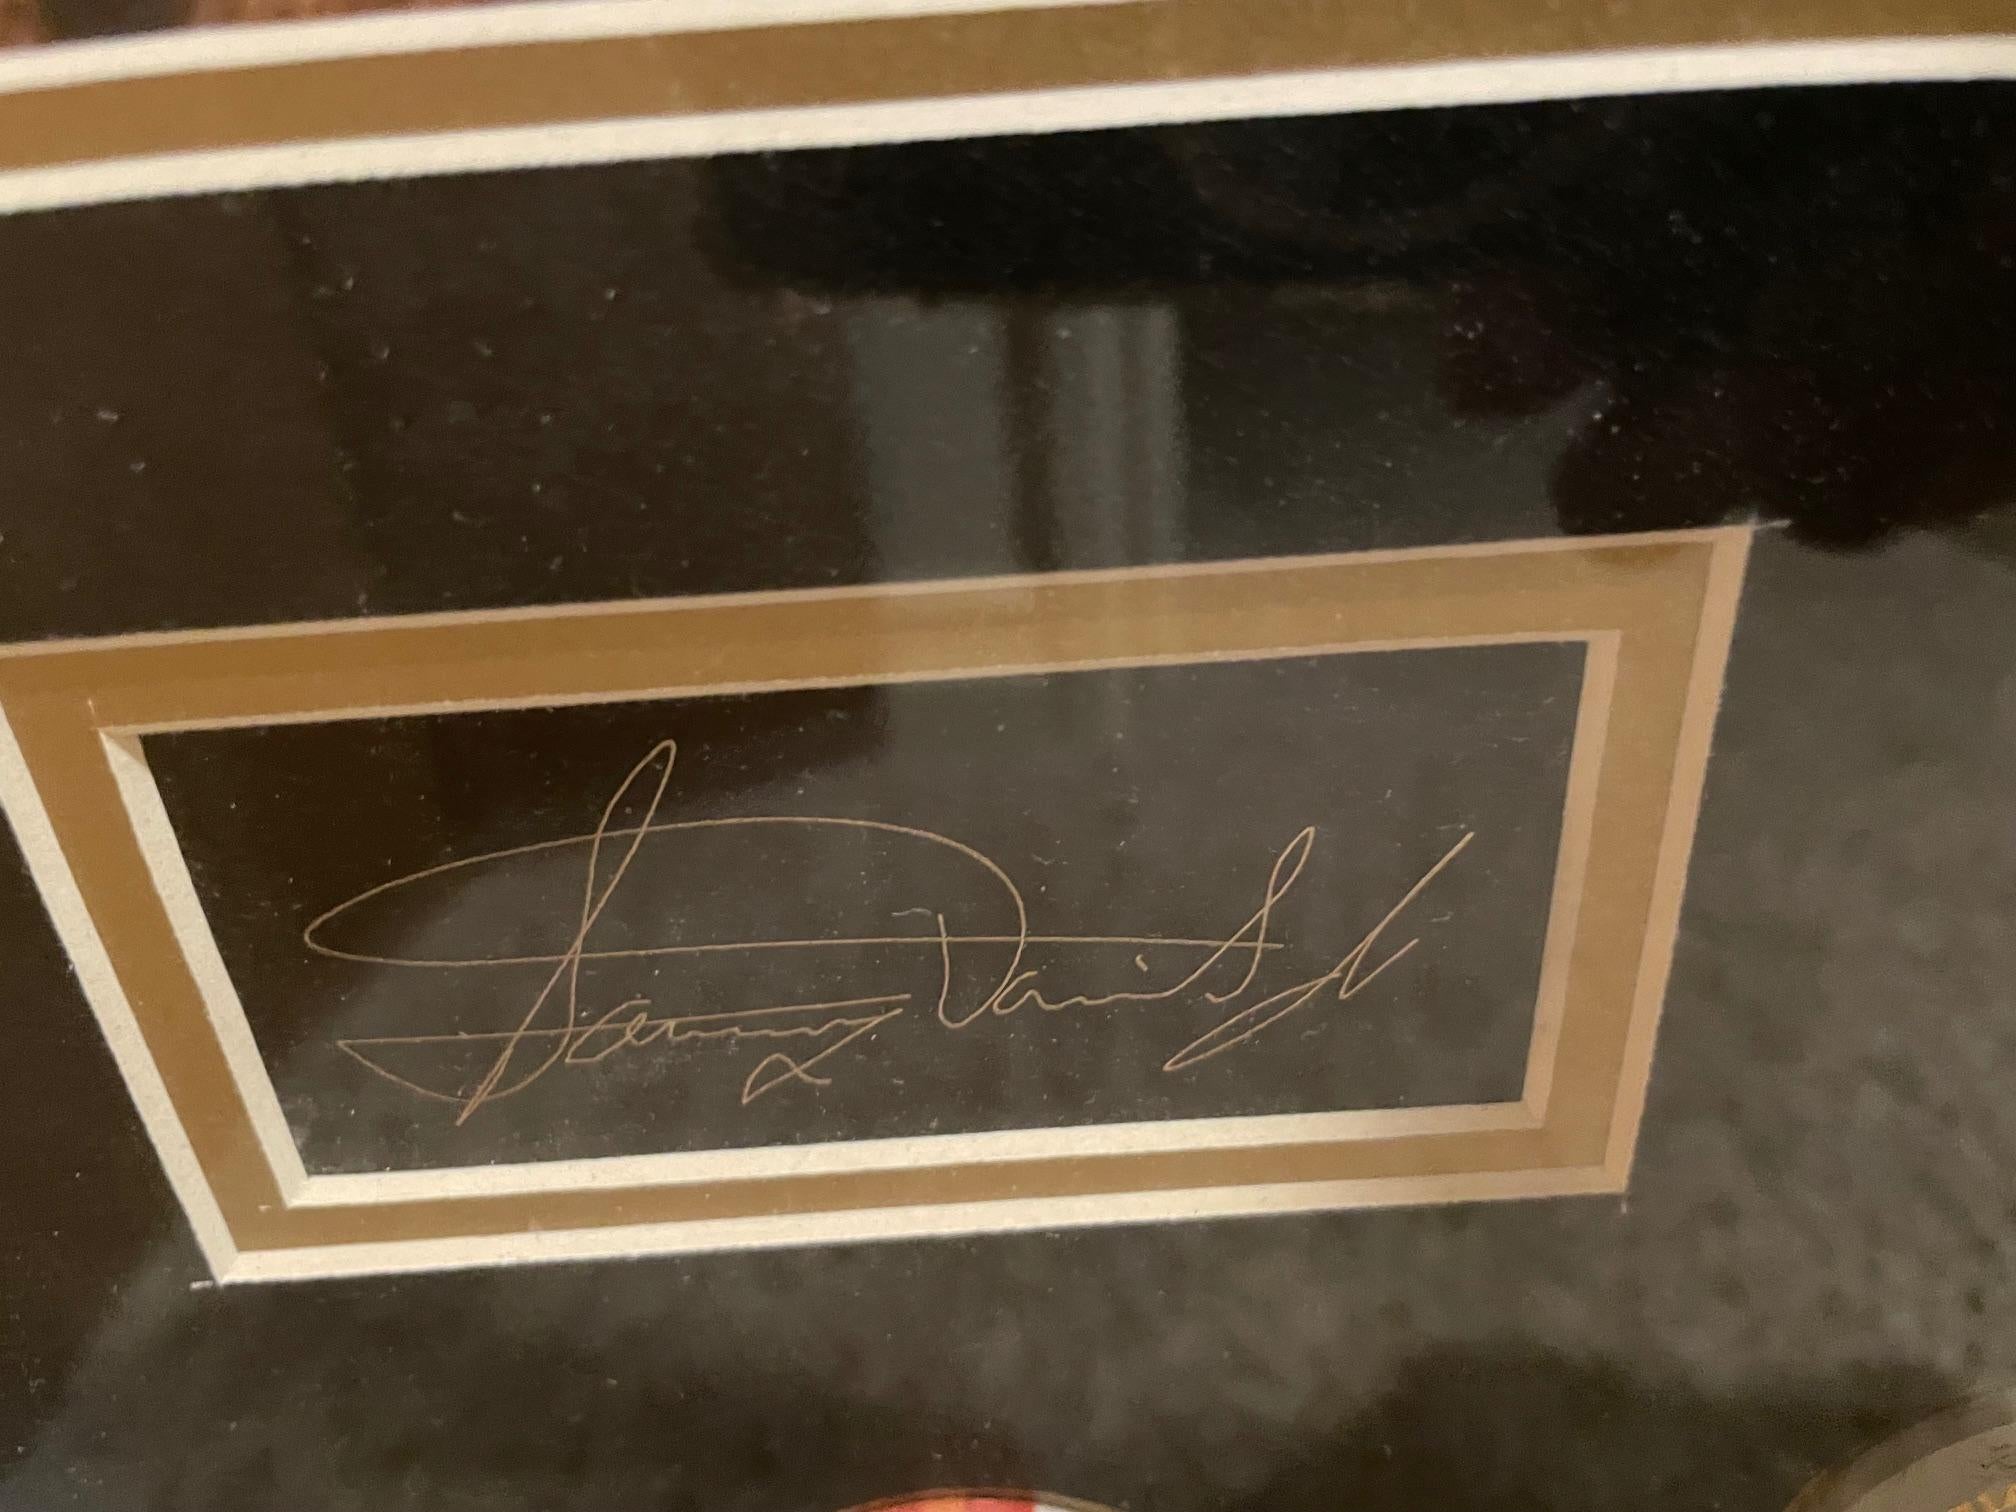 Rat Pack enthusiasts will love this piece!  It includes their signatures, photographs from the Sands Hotel in Vegas, copies of their signatures and actual chips from the casinos that no longer stand along the Vegas Strip.

It is in excellent